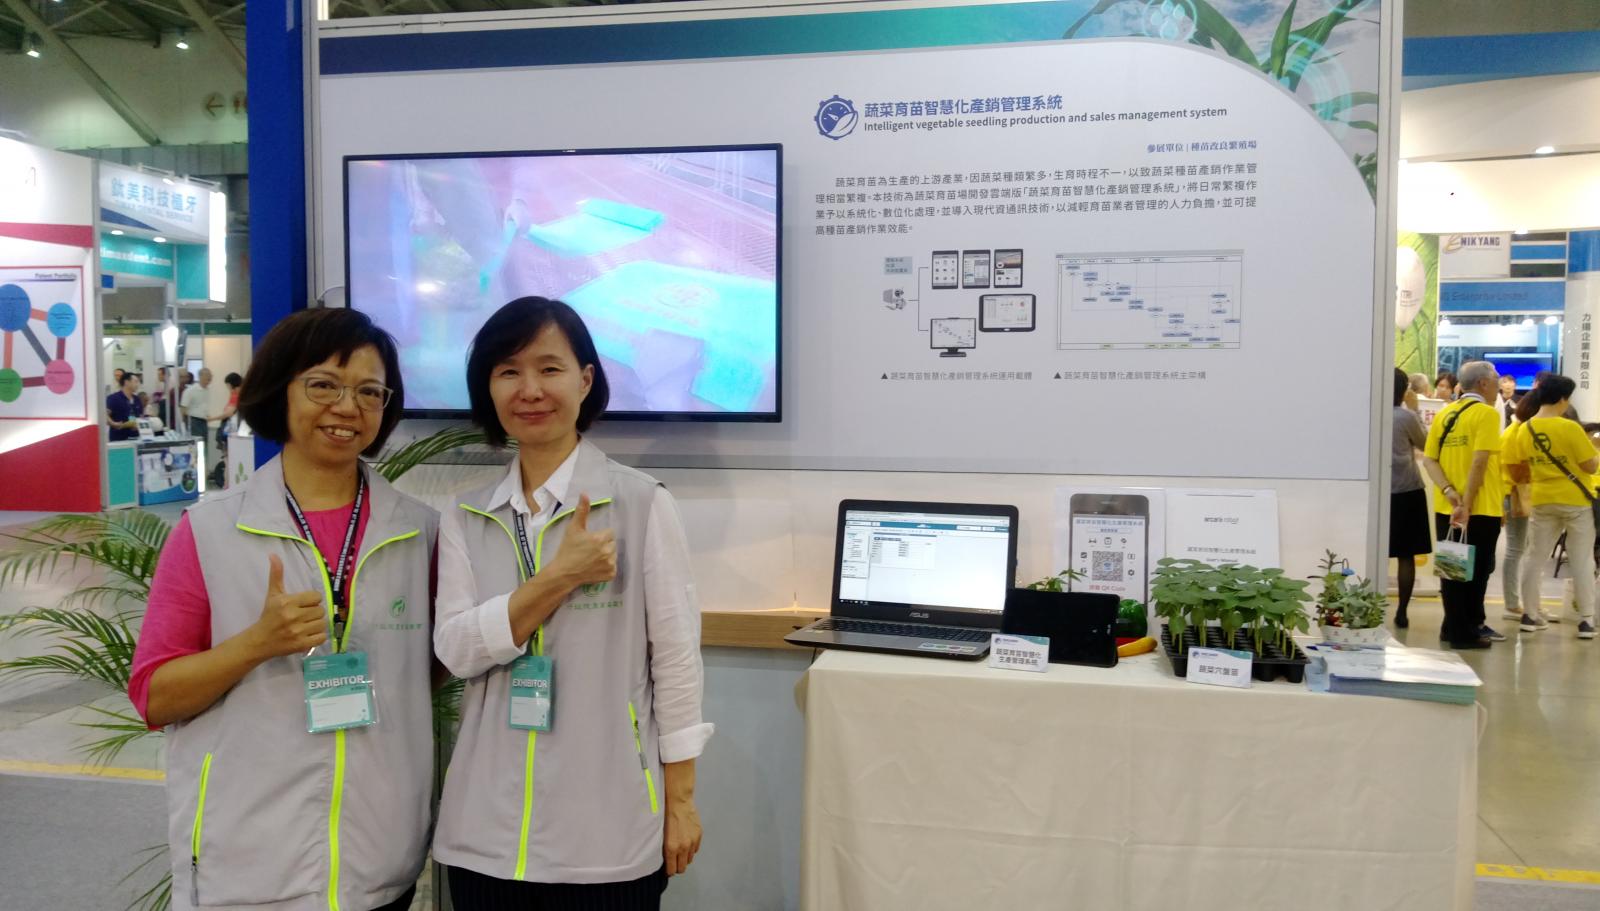 Fig2. 2018 Taiwan Biotechnology Exhibition - Agricultural Science and Technology Museum shows 「the Intelligent Vegetable Seedling Production and Sales Management System」